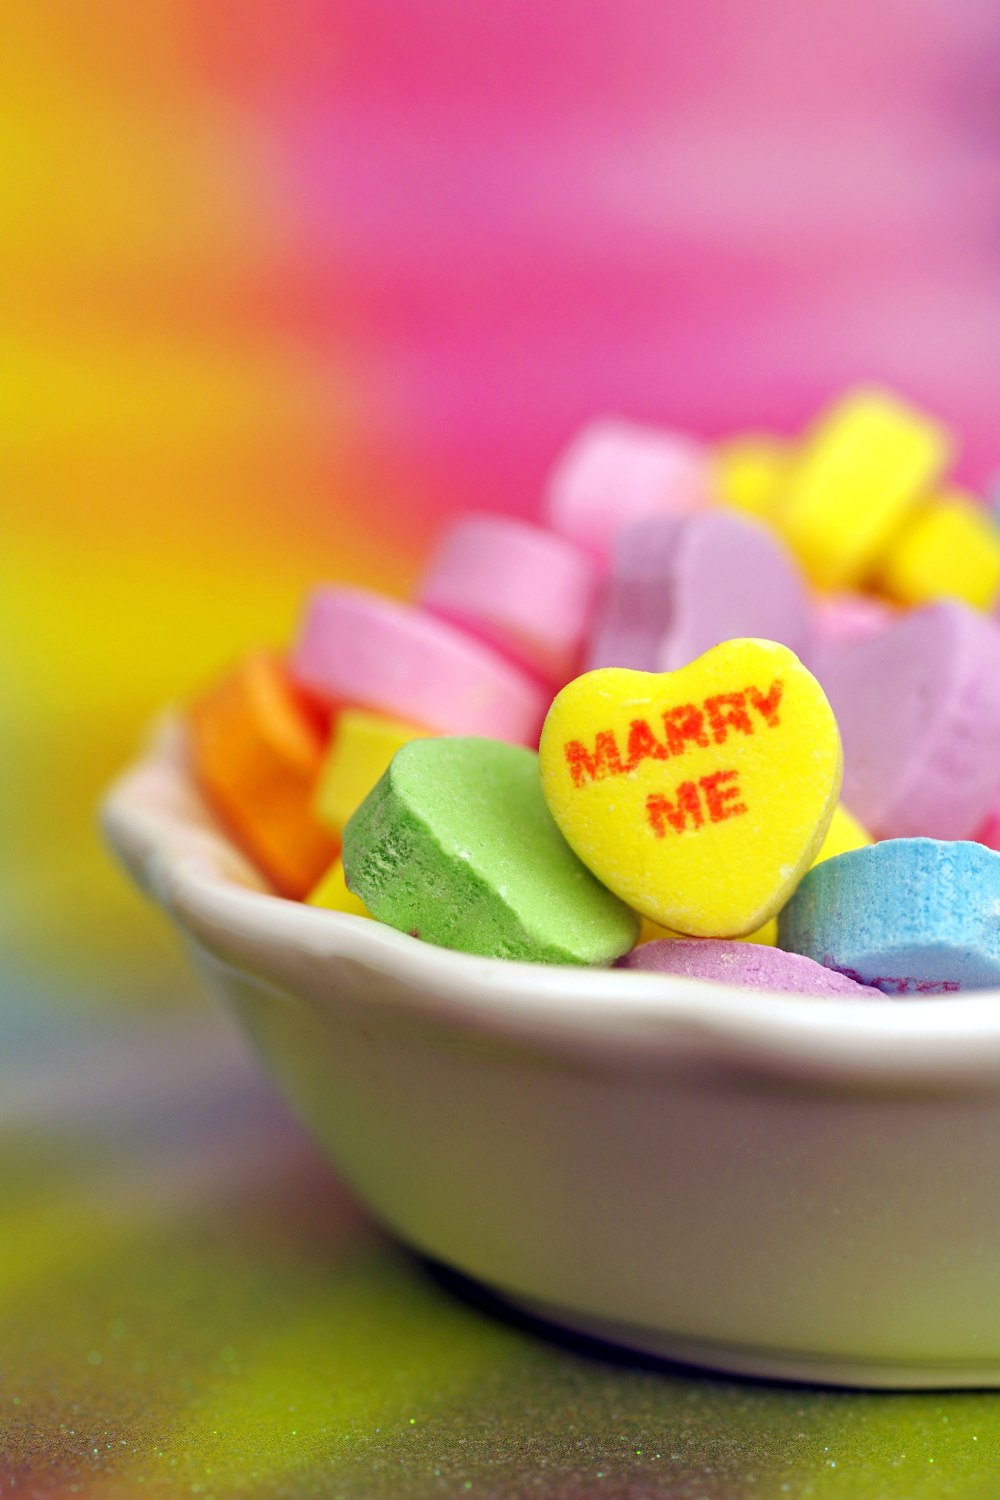 Sweethearts Conversation Hearts Won't Be Available This Valentine's Day